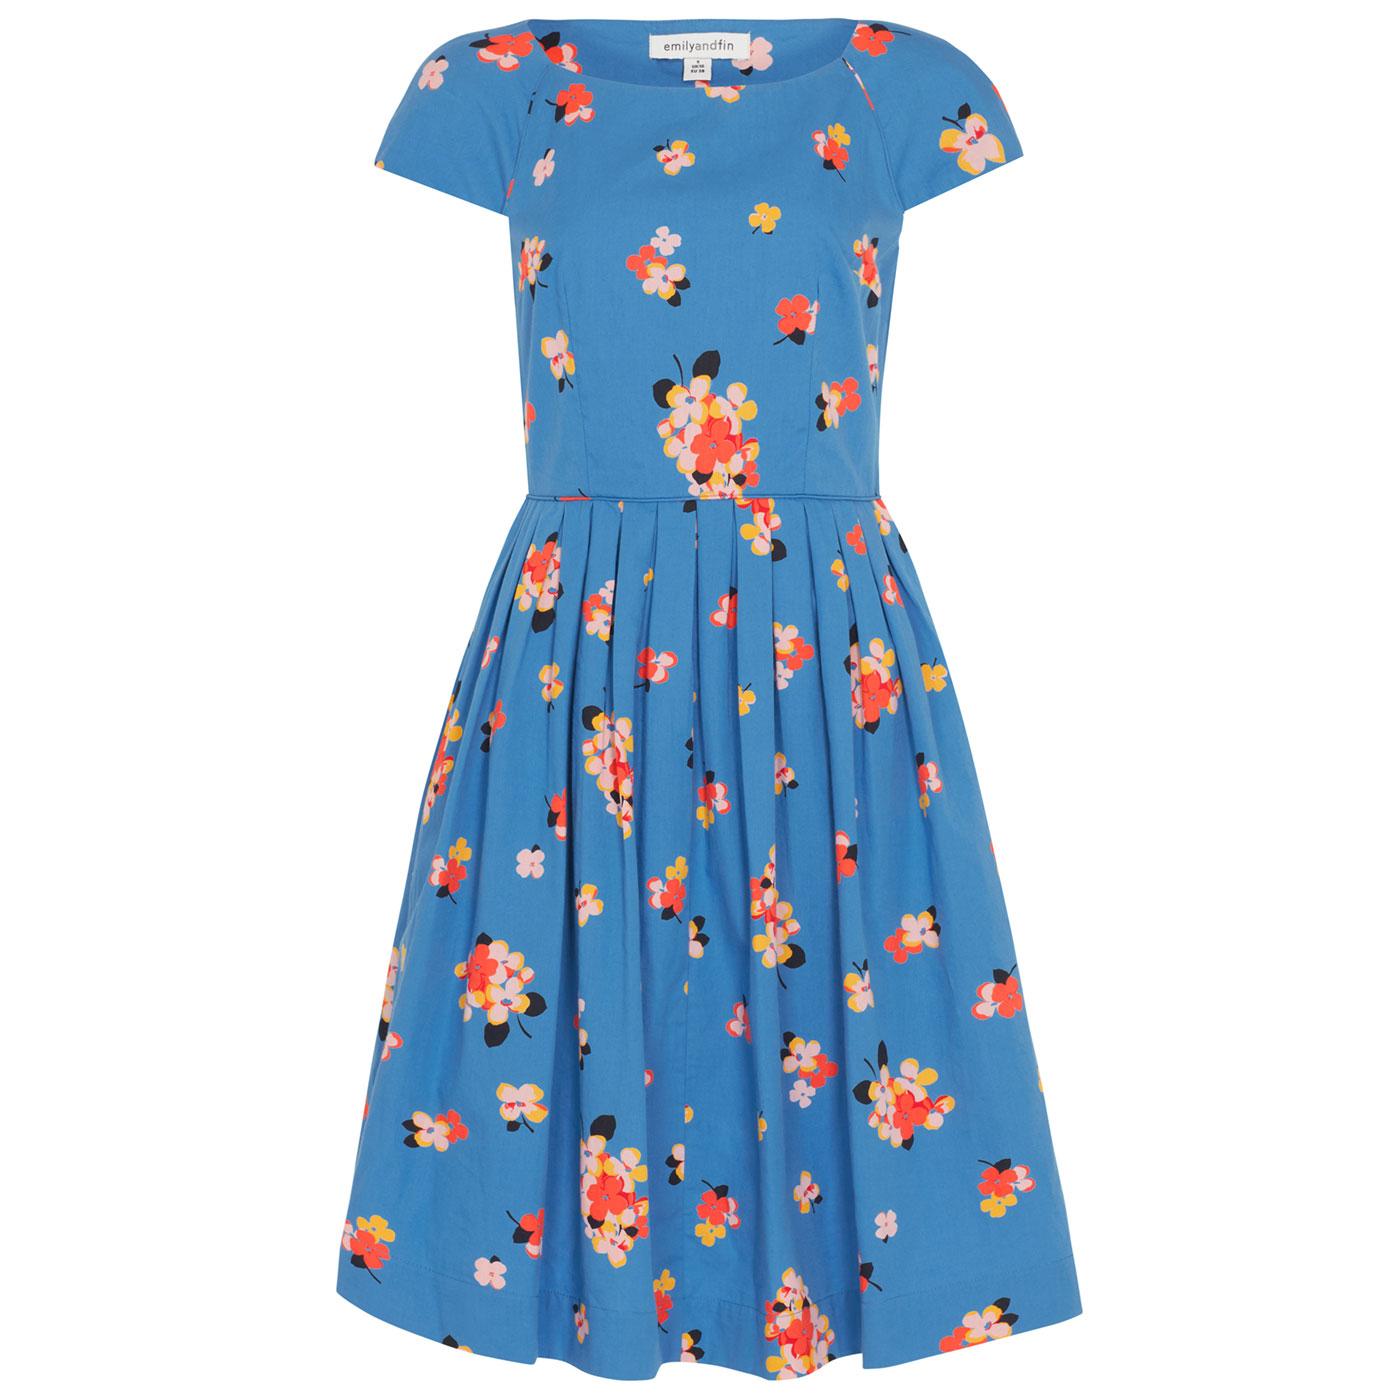 EMILY AND FIN Claudia Sweet Summer Blooms Floral Dress